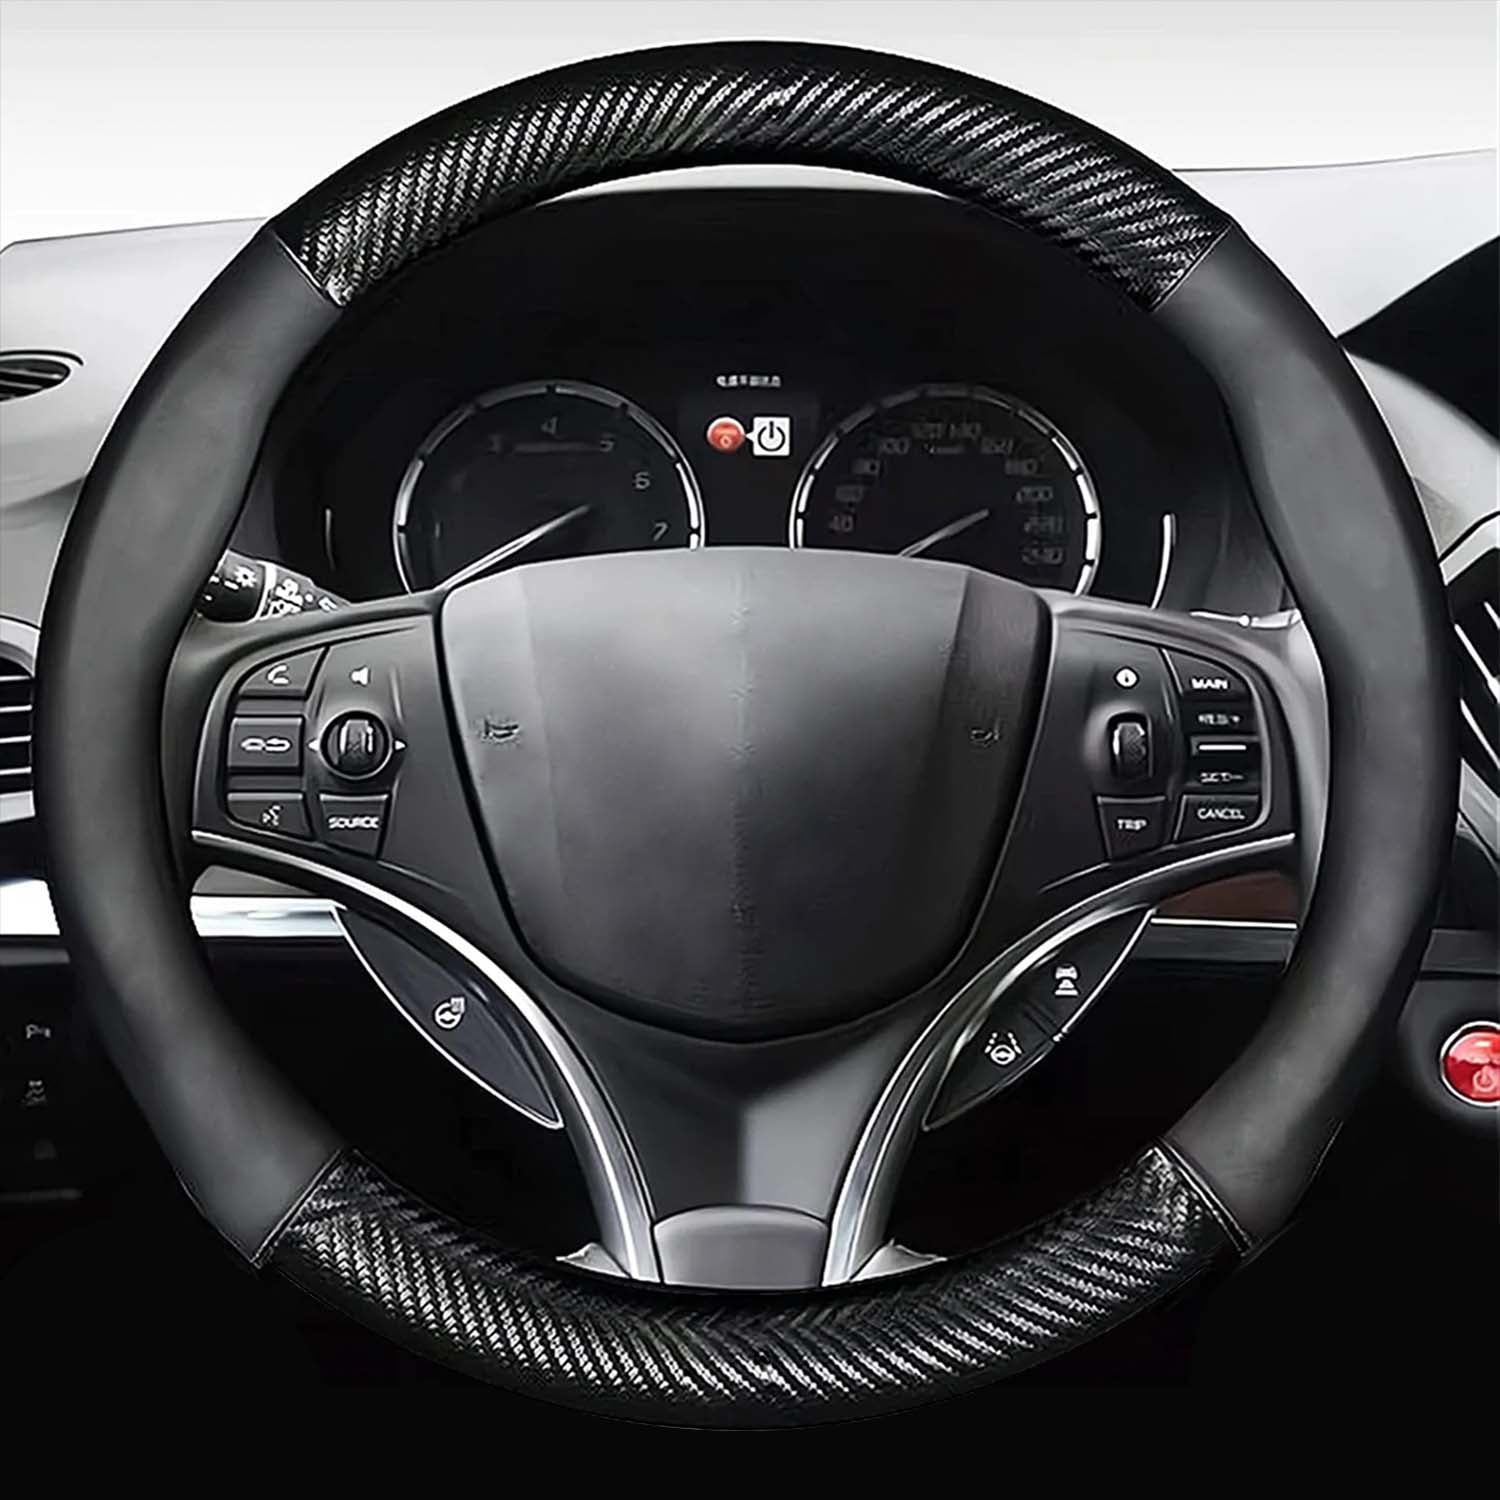 Enhance Your Ride with a Stylish Subaru Steering Wheel Cover